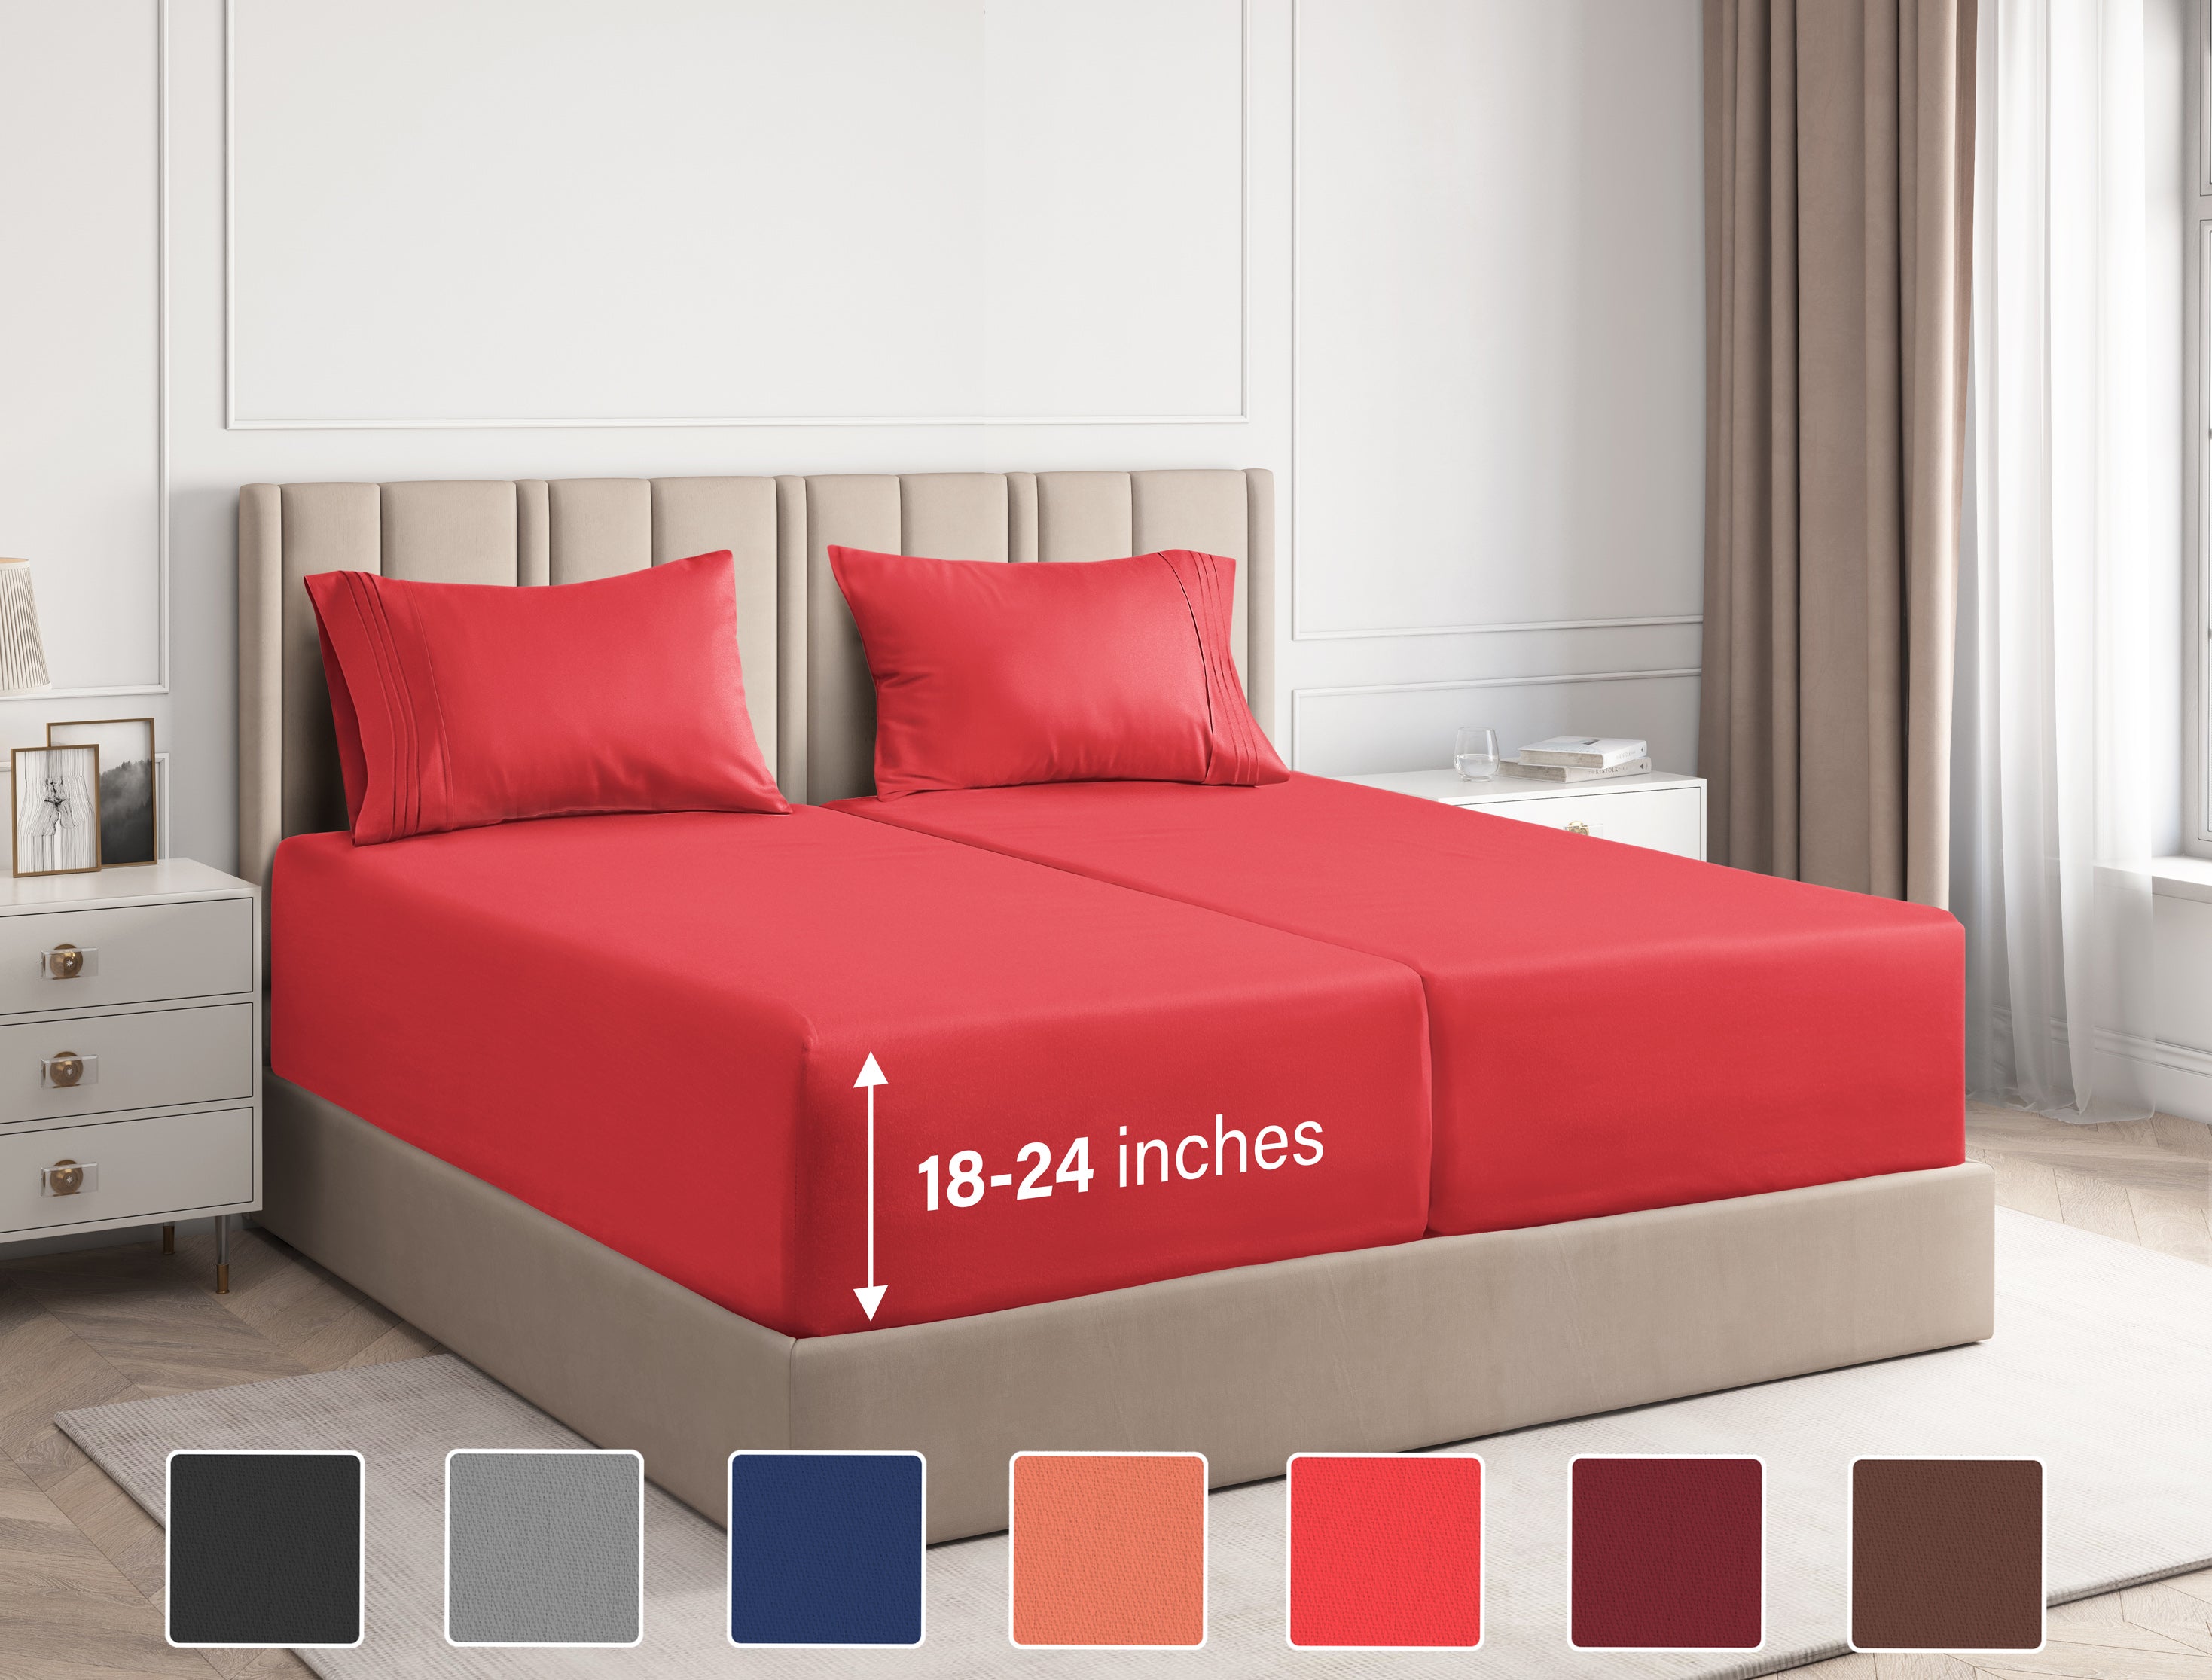 21 inches EXTRA DEEP POCKET - 600 Thread Count California King